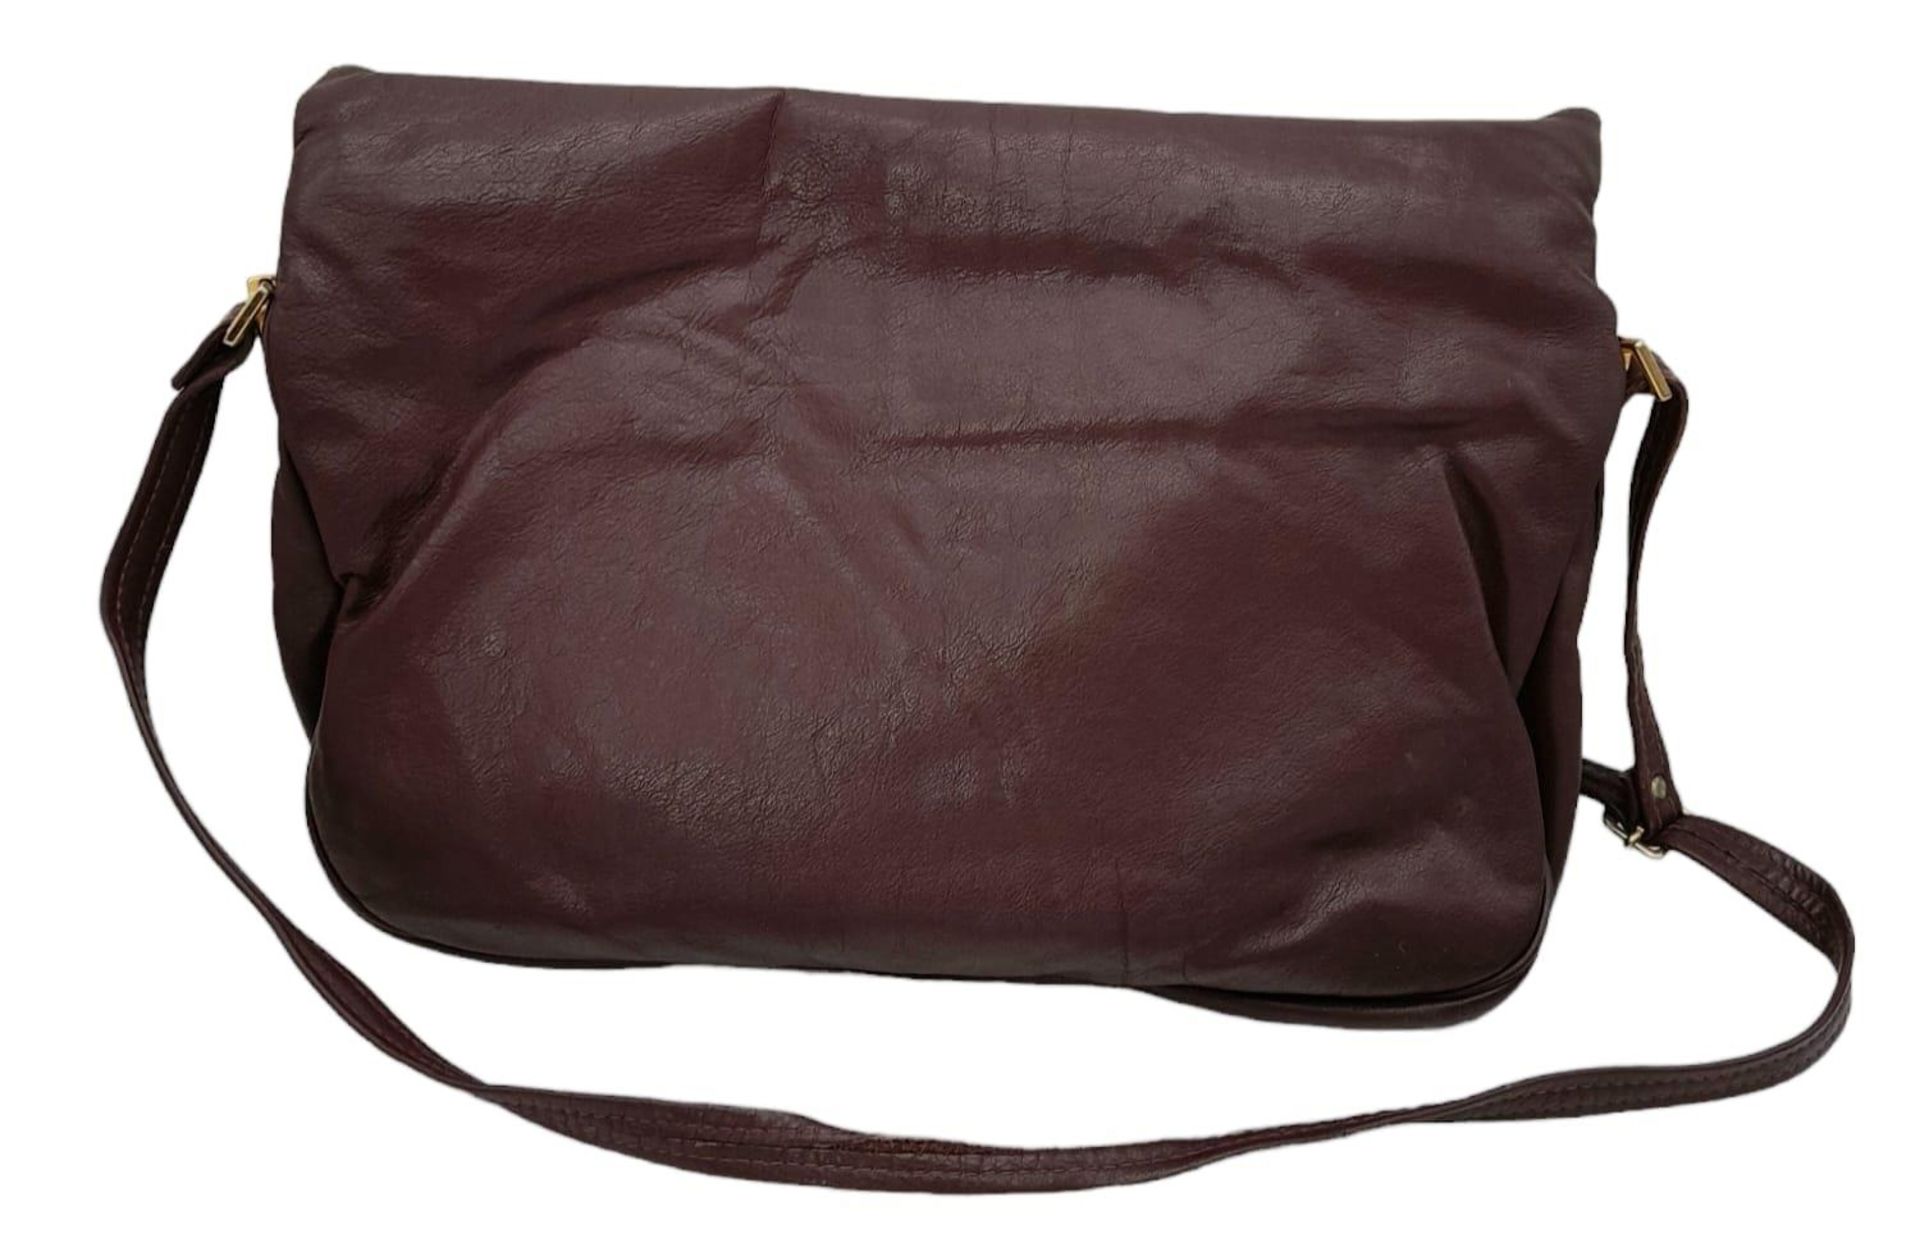 A Vintage Burgundy Leather Handbag. Burgundy leather with large exterior pocket. Gilded touches. - Image 2 of 9